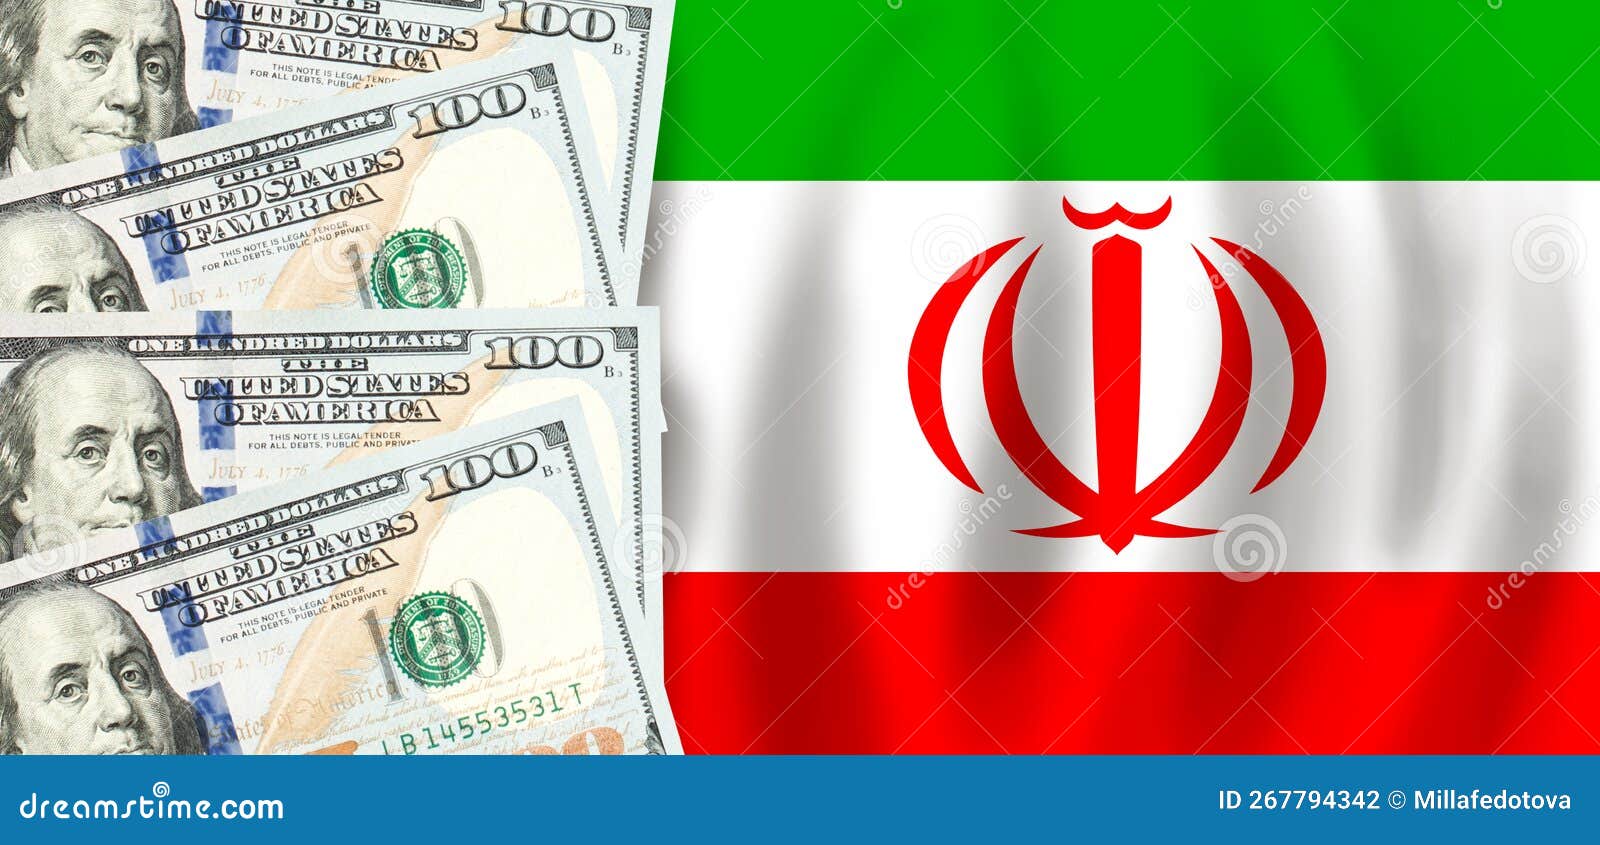 dollars on flag of iran, irani finance, subsidies, social support, gdp concept